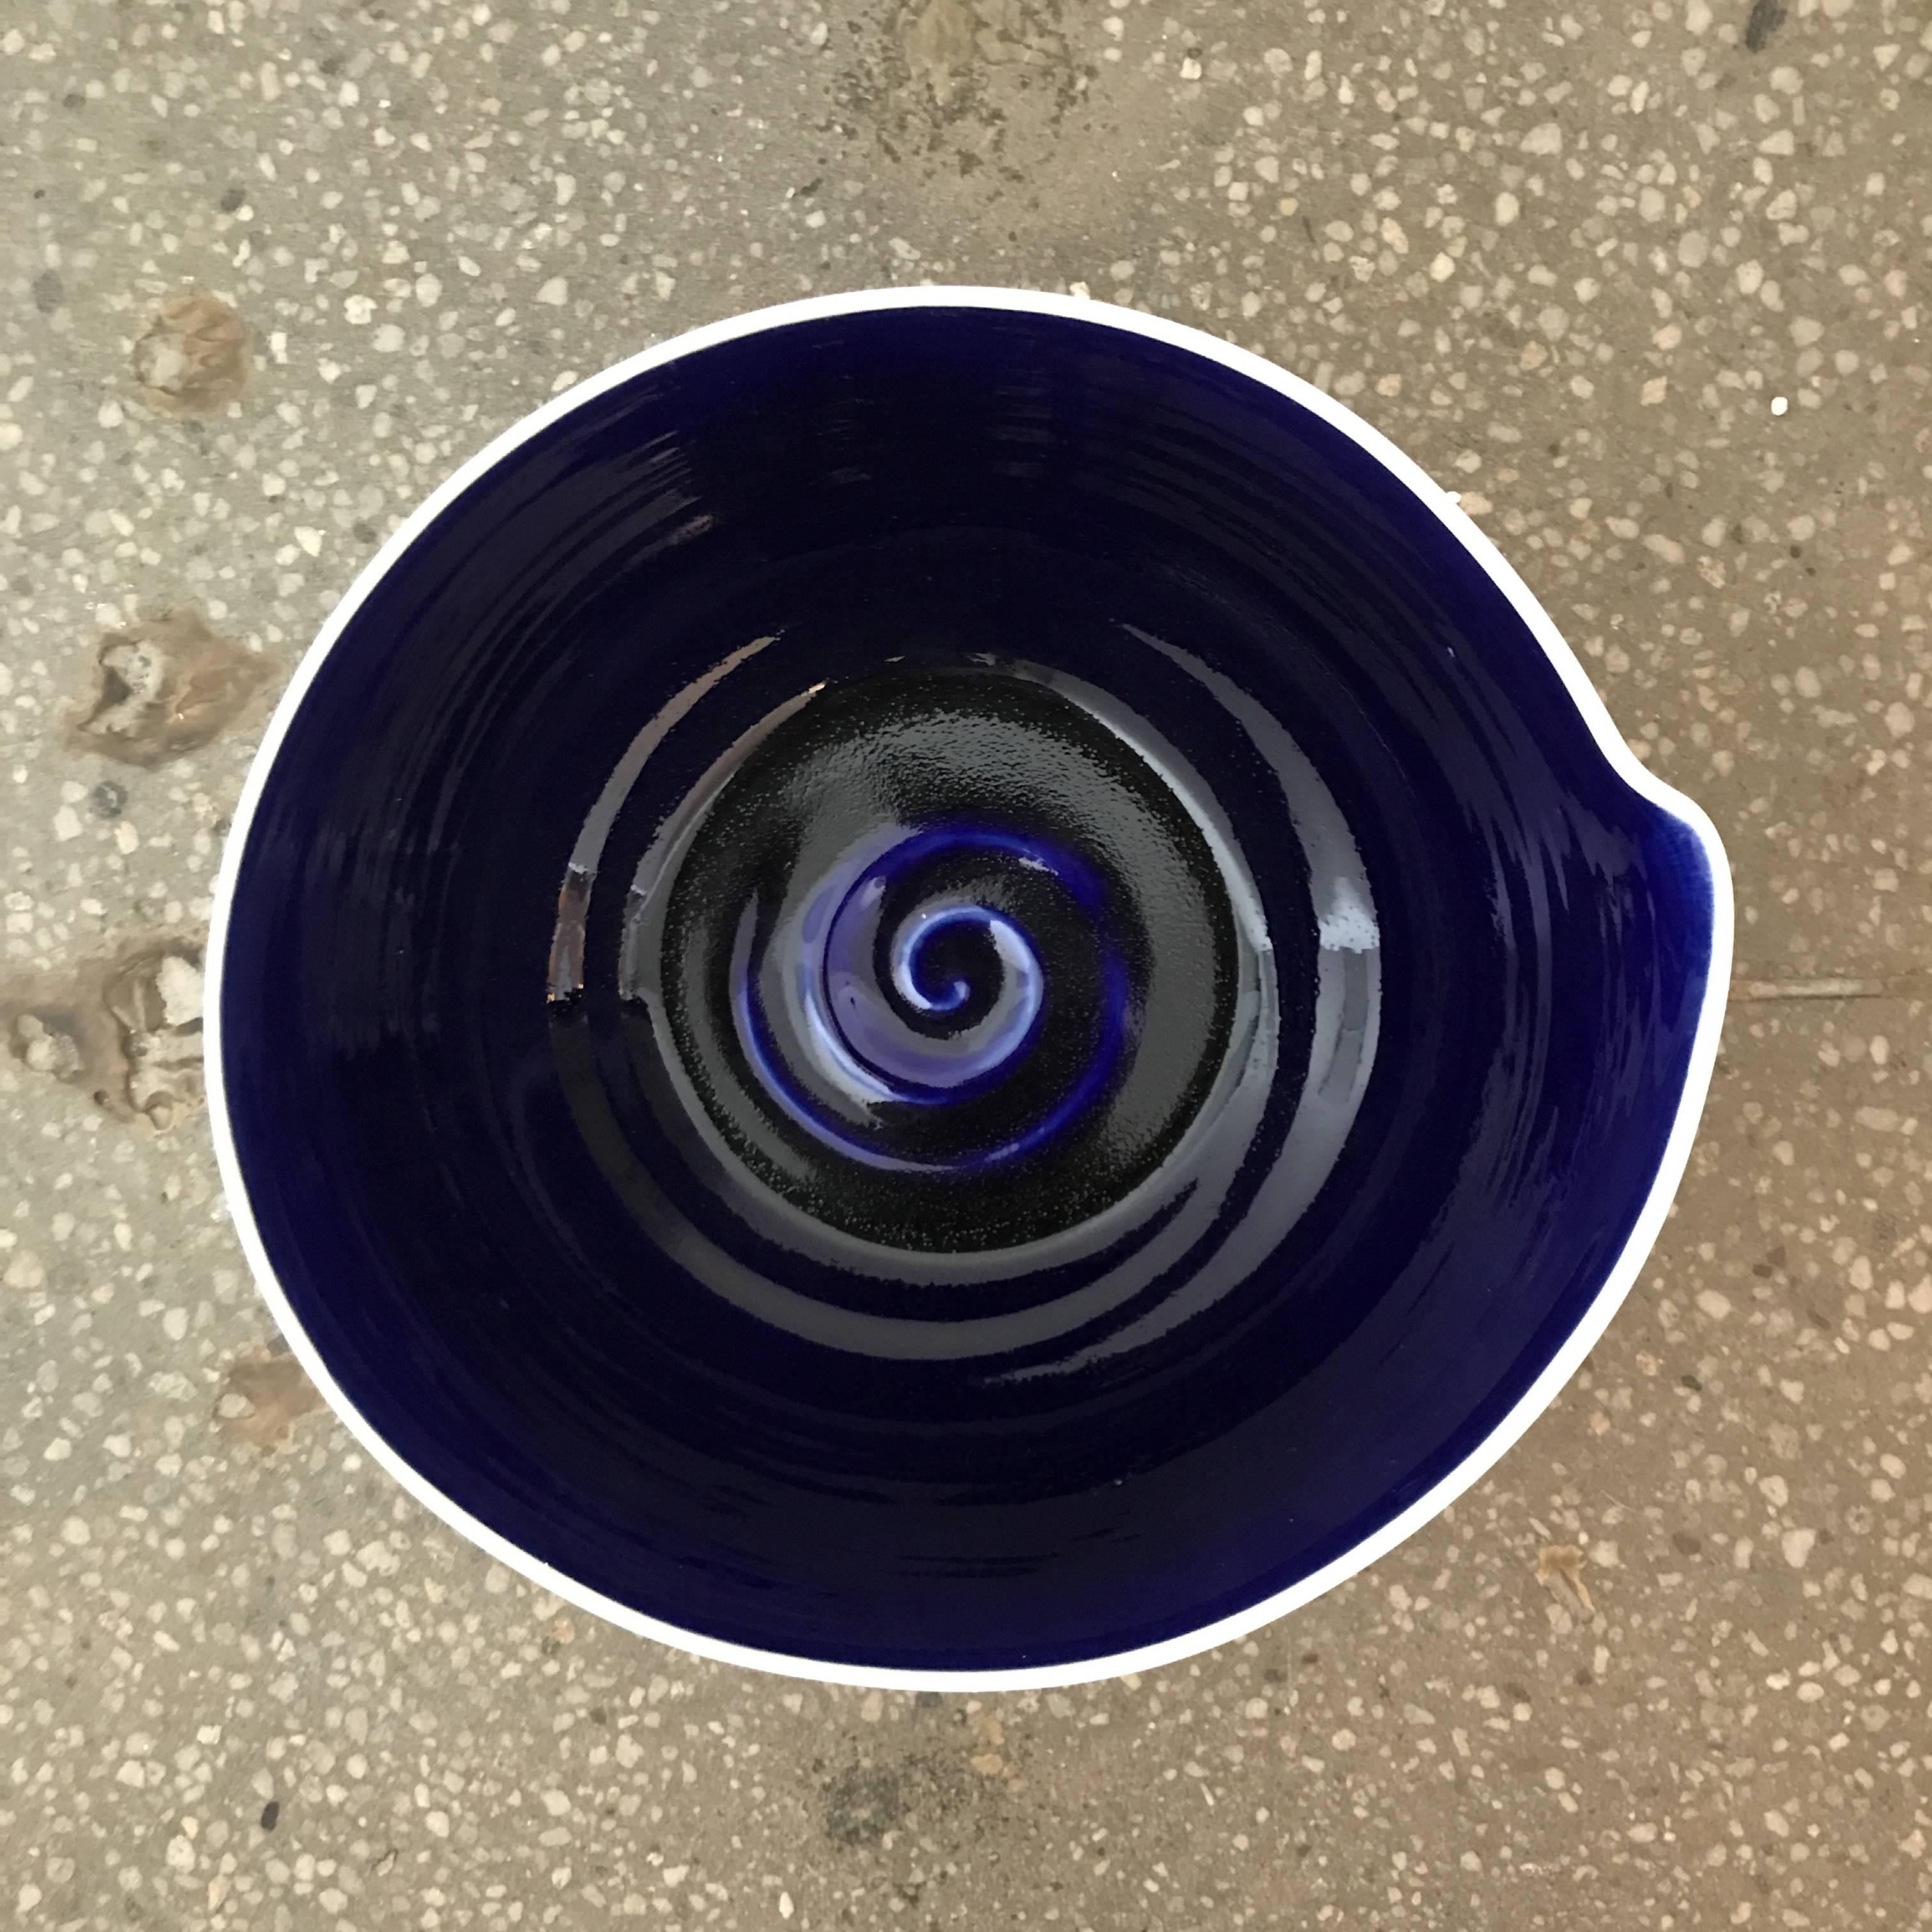 Hand-thrown blue and white ceramic Studio Pottery bowls created by a local artisan in Jaffa Israel. 
Indigo blue interior with white exterior. Subtle bend detail on the rim of each bowl. Intricate graphics and artist signature on the bottom.